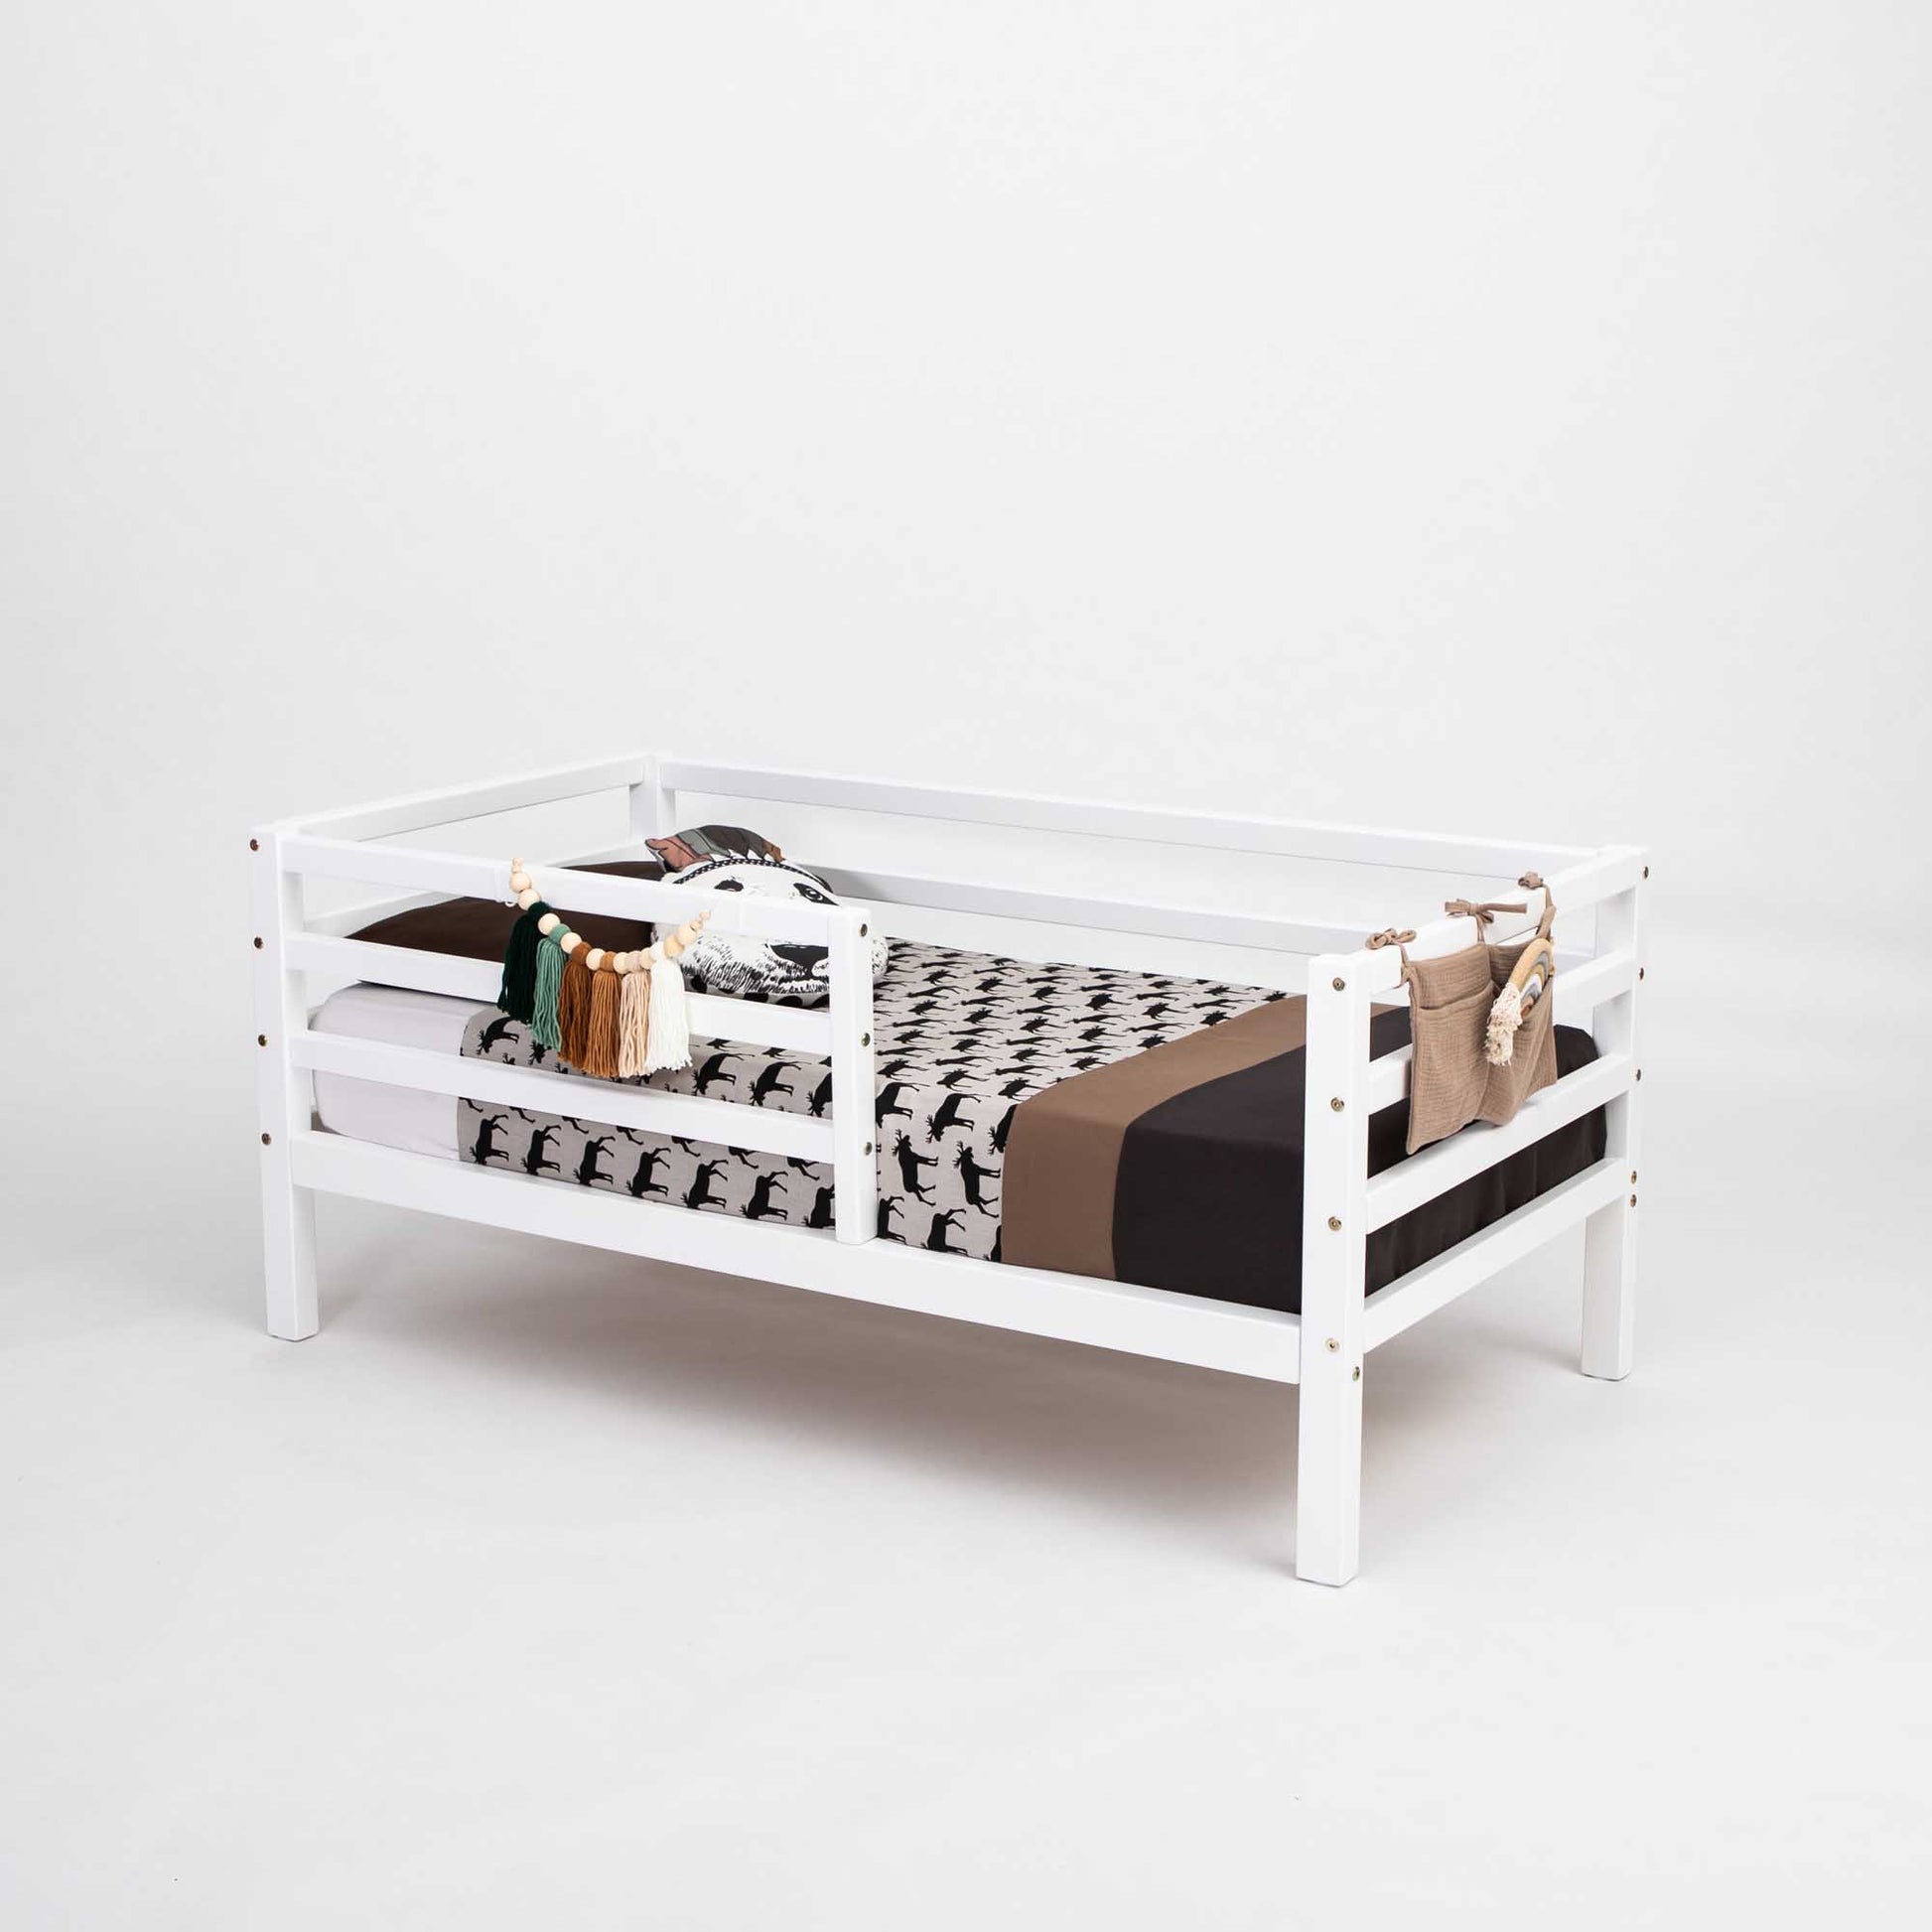 A Sweet Home From Wood Kids' bed on legs with a horizontal rail fence.